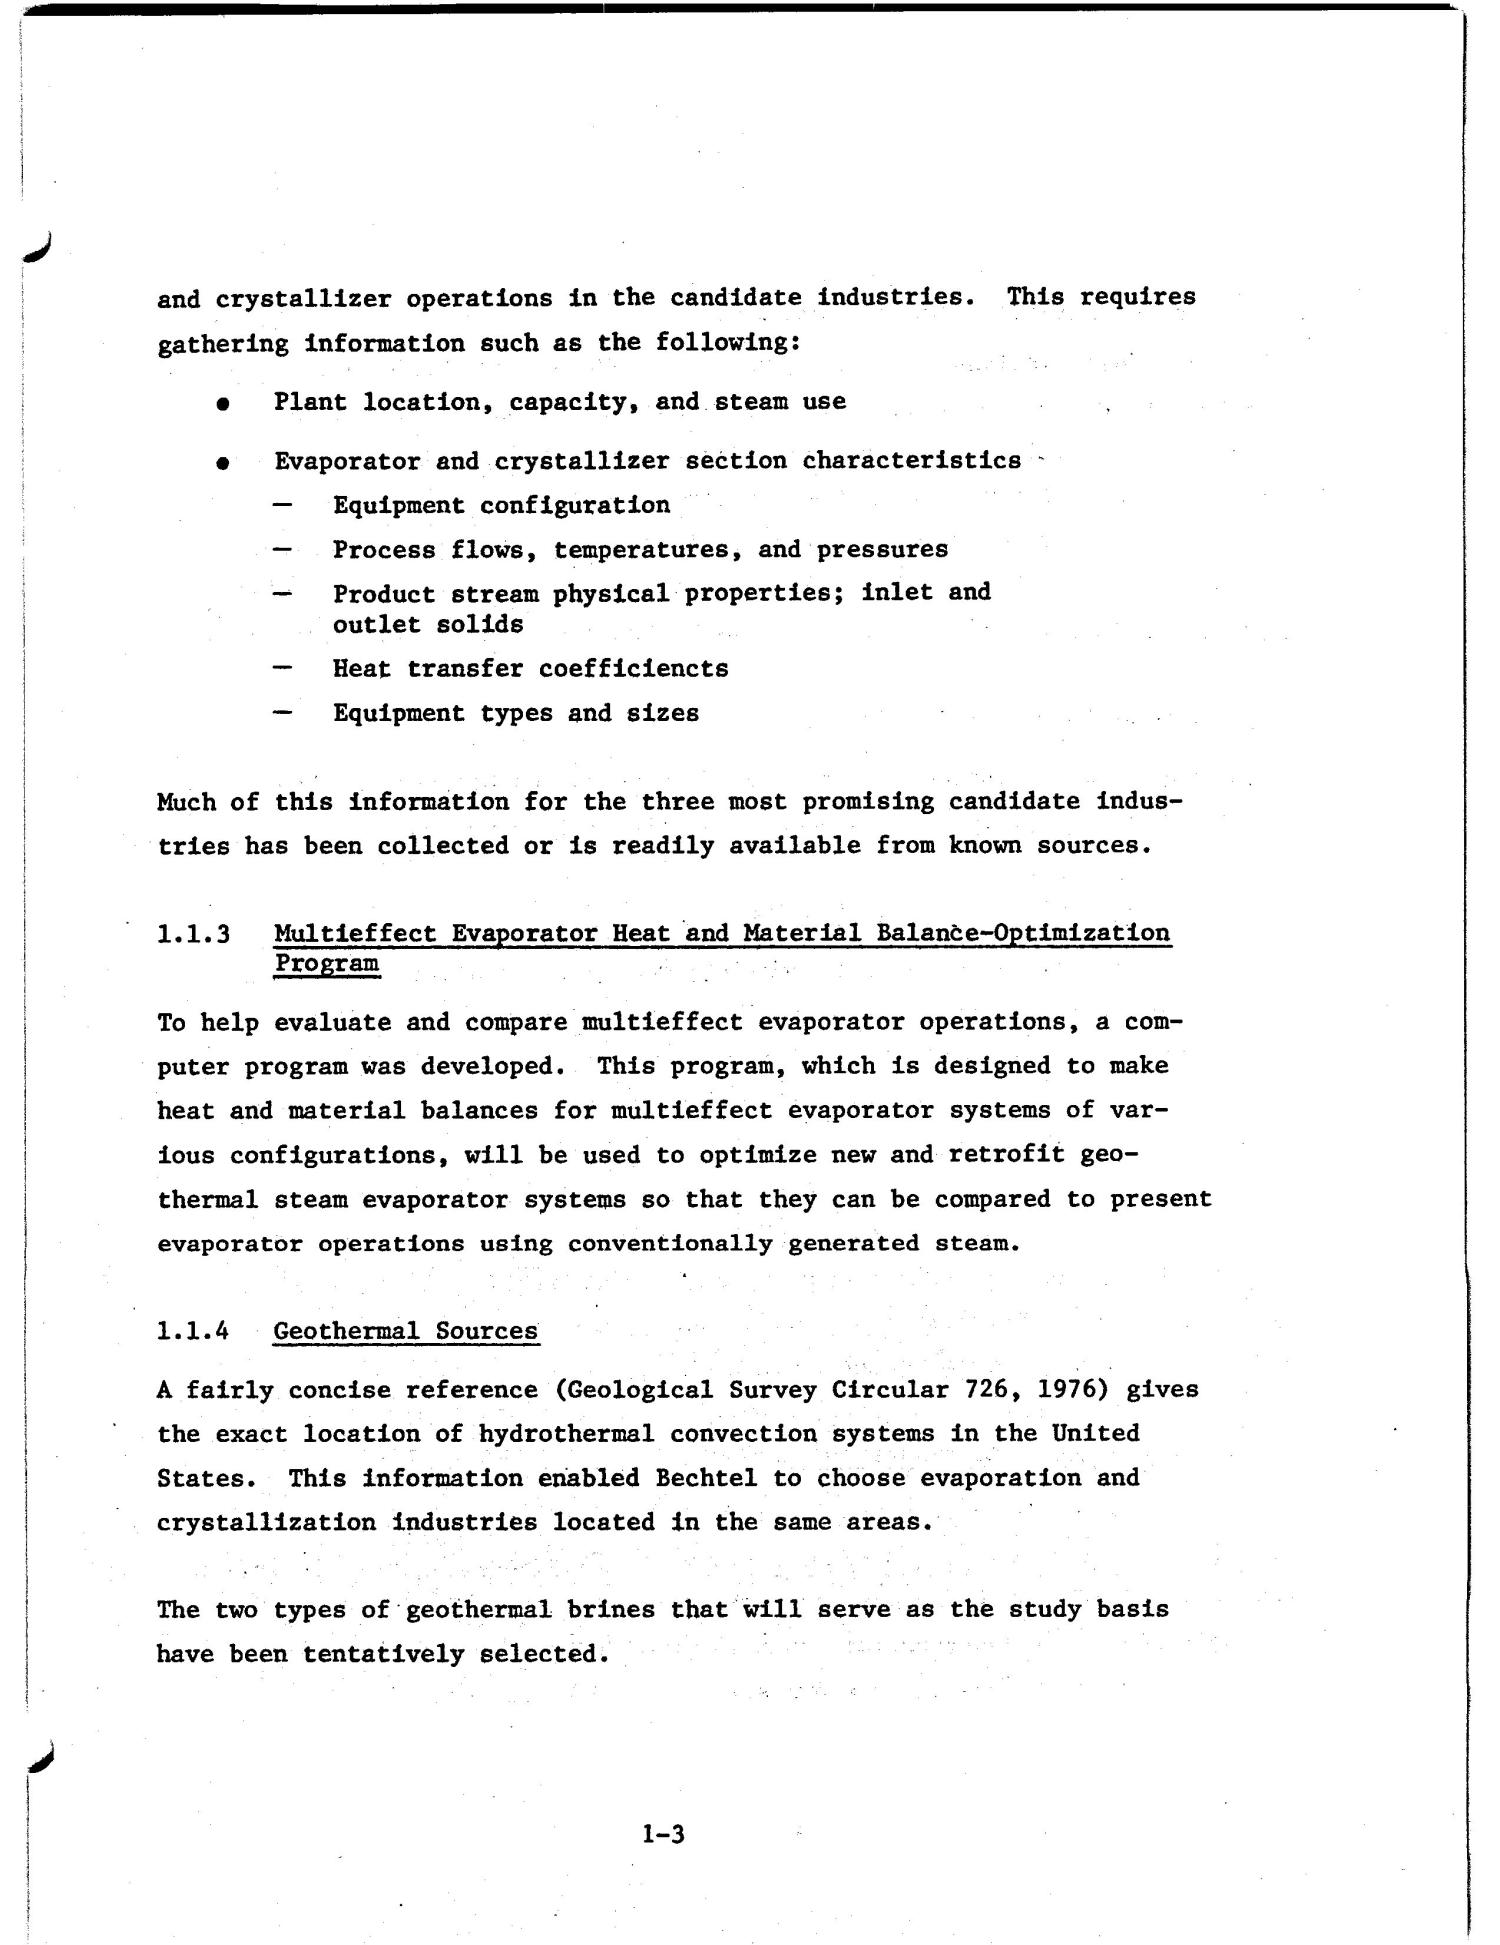 Multiflash feed-and-bleed coupling for the evaporation and crystallization industry. Technical report, September 29-December 31, 1976
                                                
                                                    [Sequence #]: 11 of 70
                                                